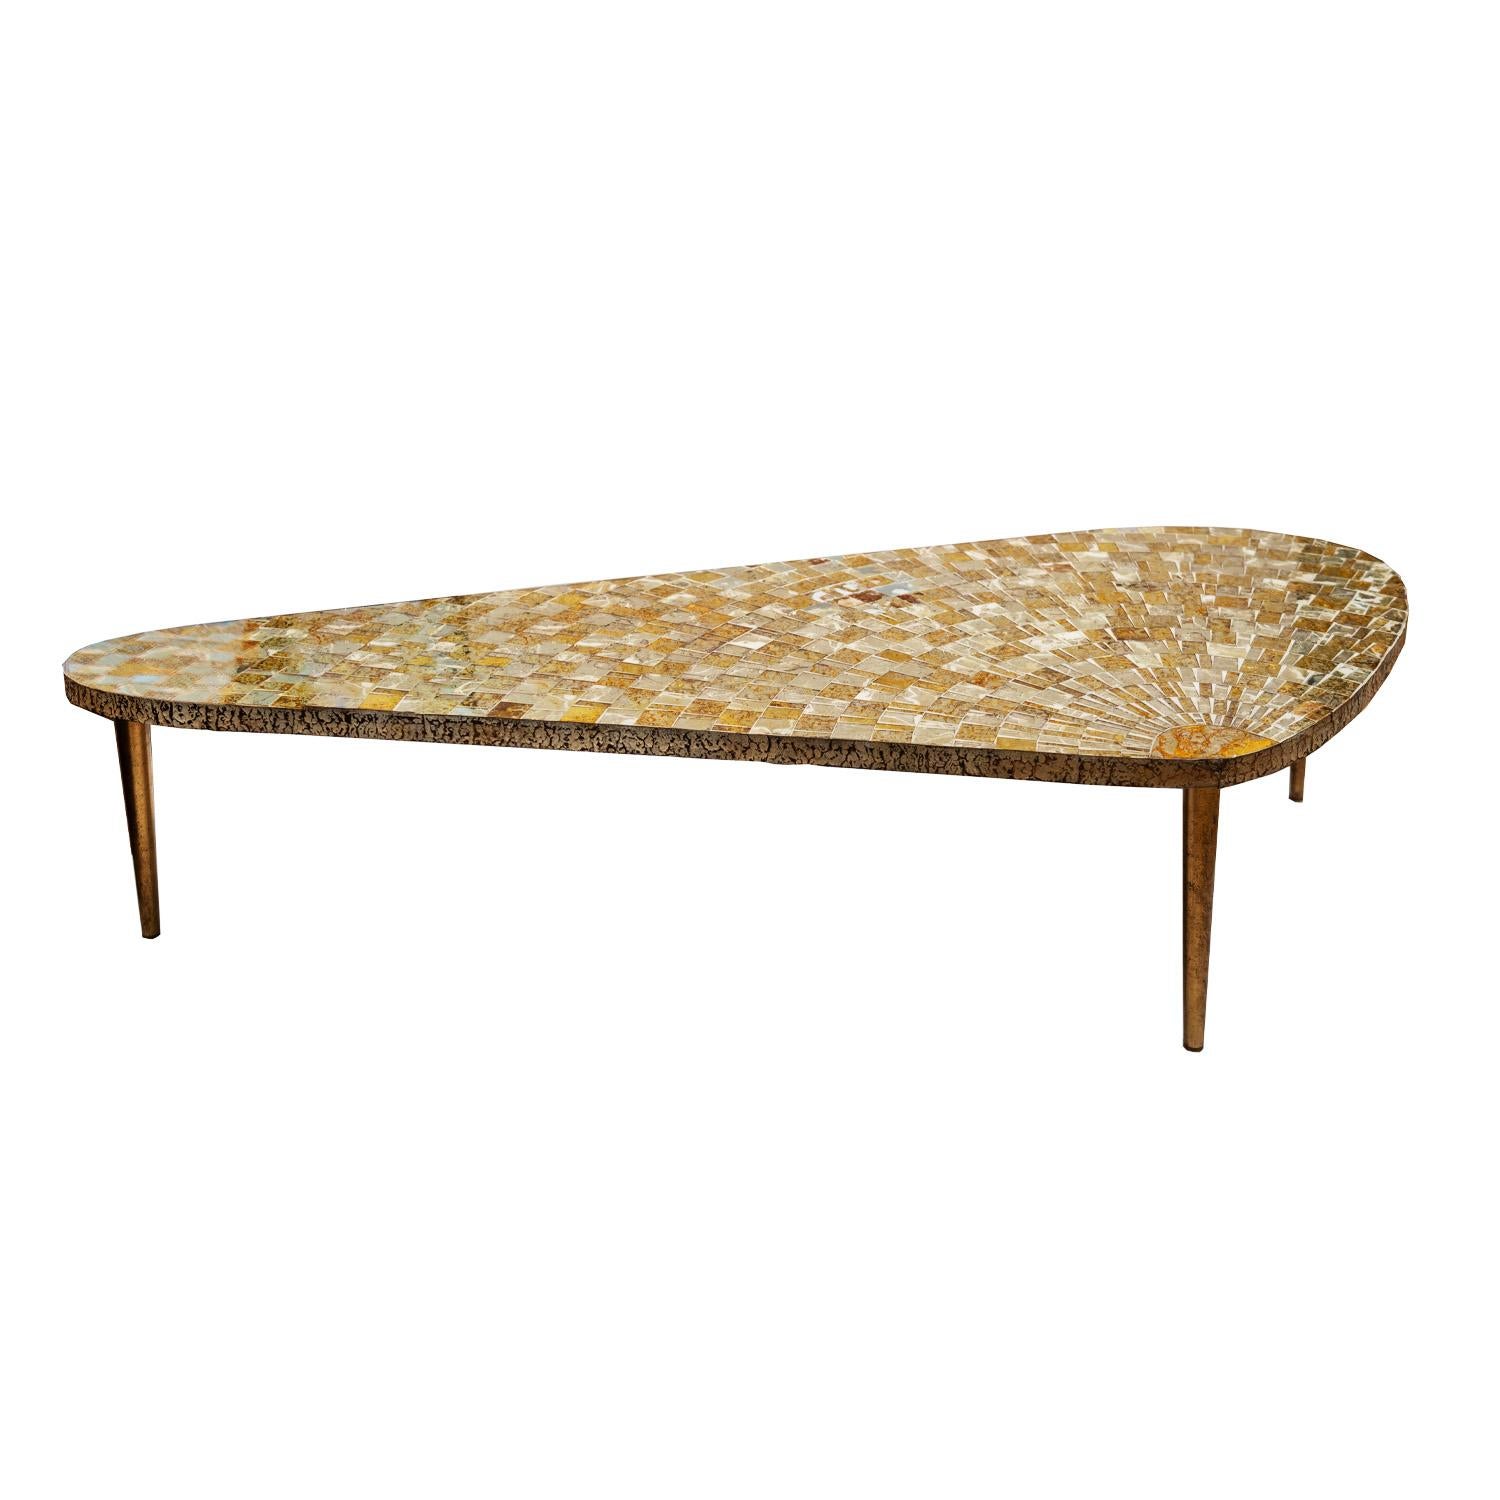 Artisan coffee table with tessellated glass top with reverse etched oxidized gold and platinum with tapering brushed bronze legs, Italian 1950's. The tessellated glass makes for a unique, luminous appearance.

 